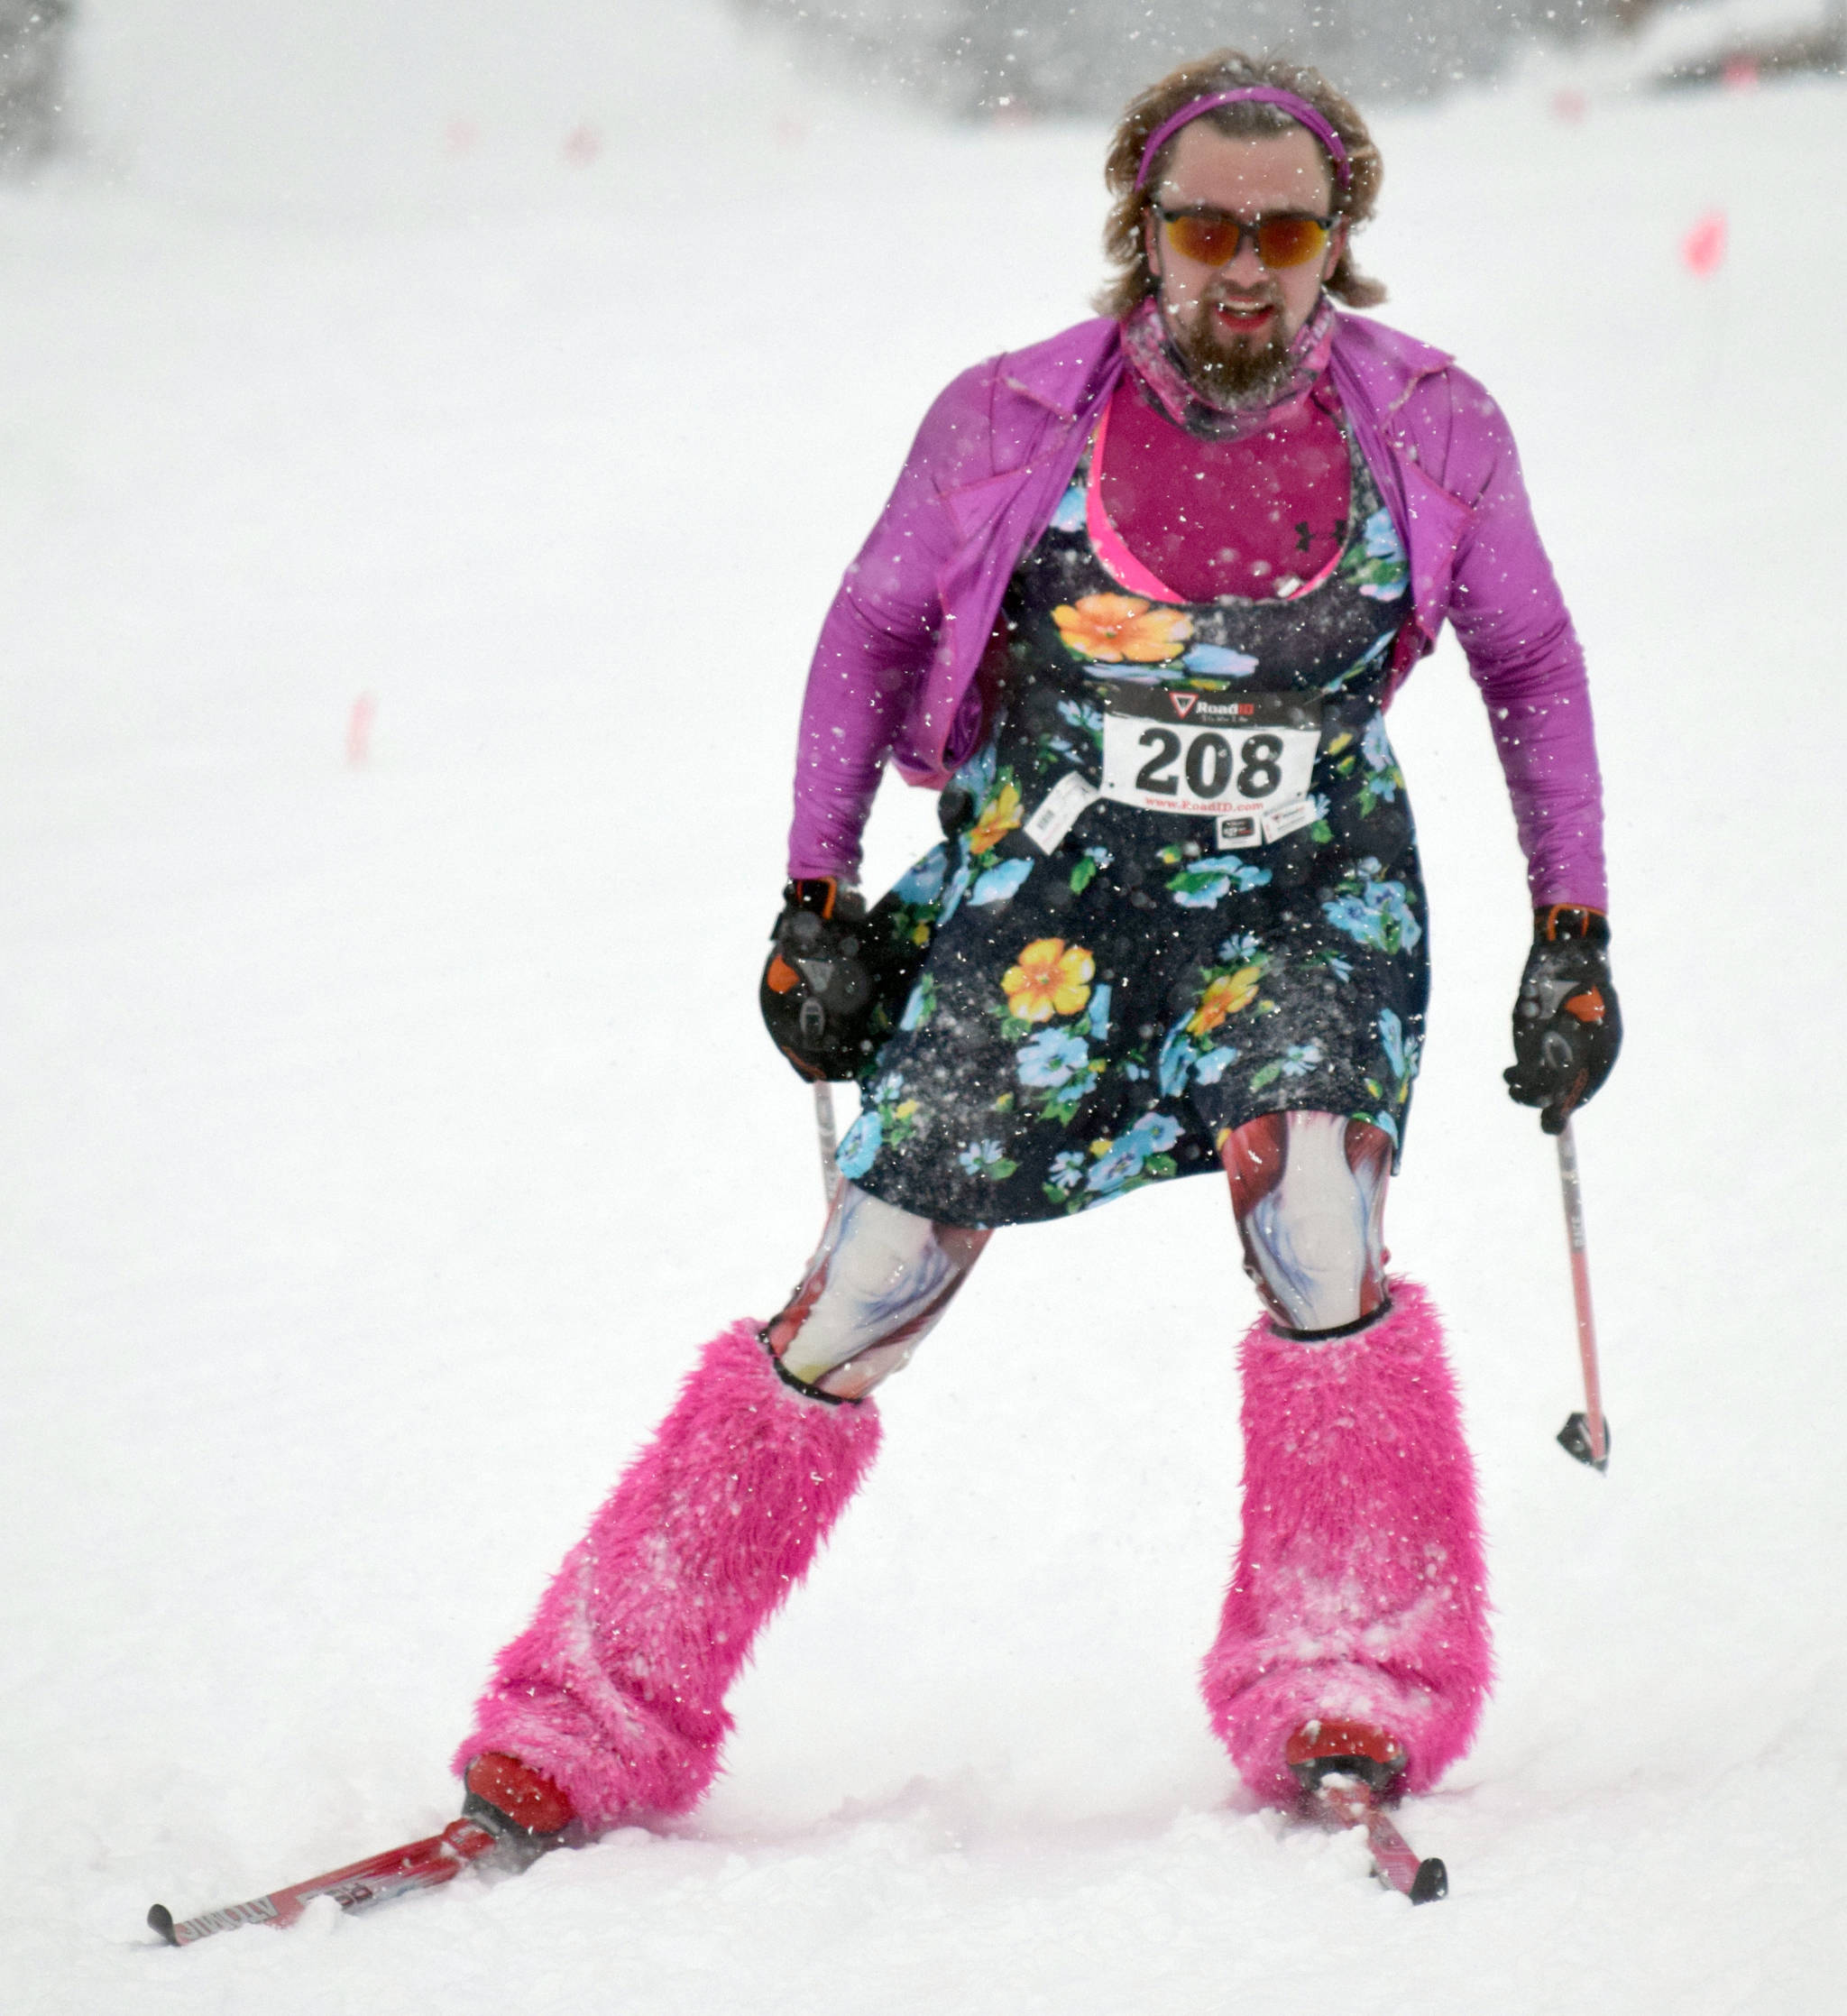 Nate Mole competes in the drag race Sunday, Feb. 3, 2019, at the Ski for Women at Tsalteshi Trails. (Photo by Jeff Helminiak/Peninsula Clarion)